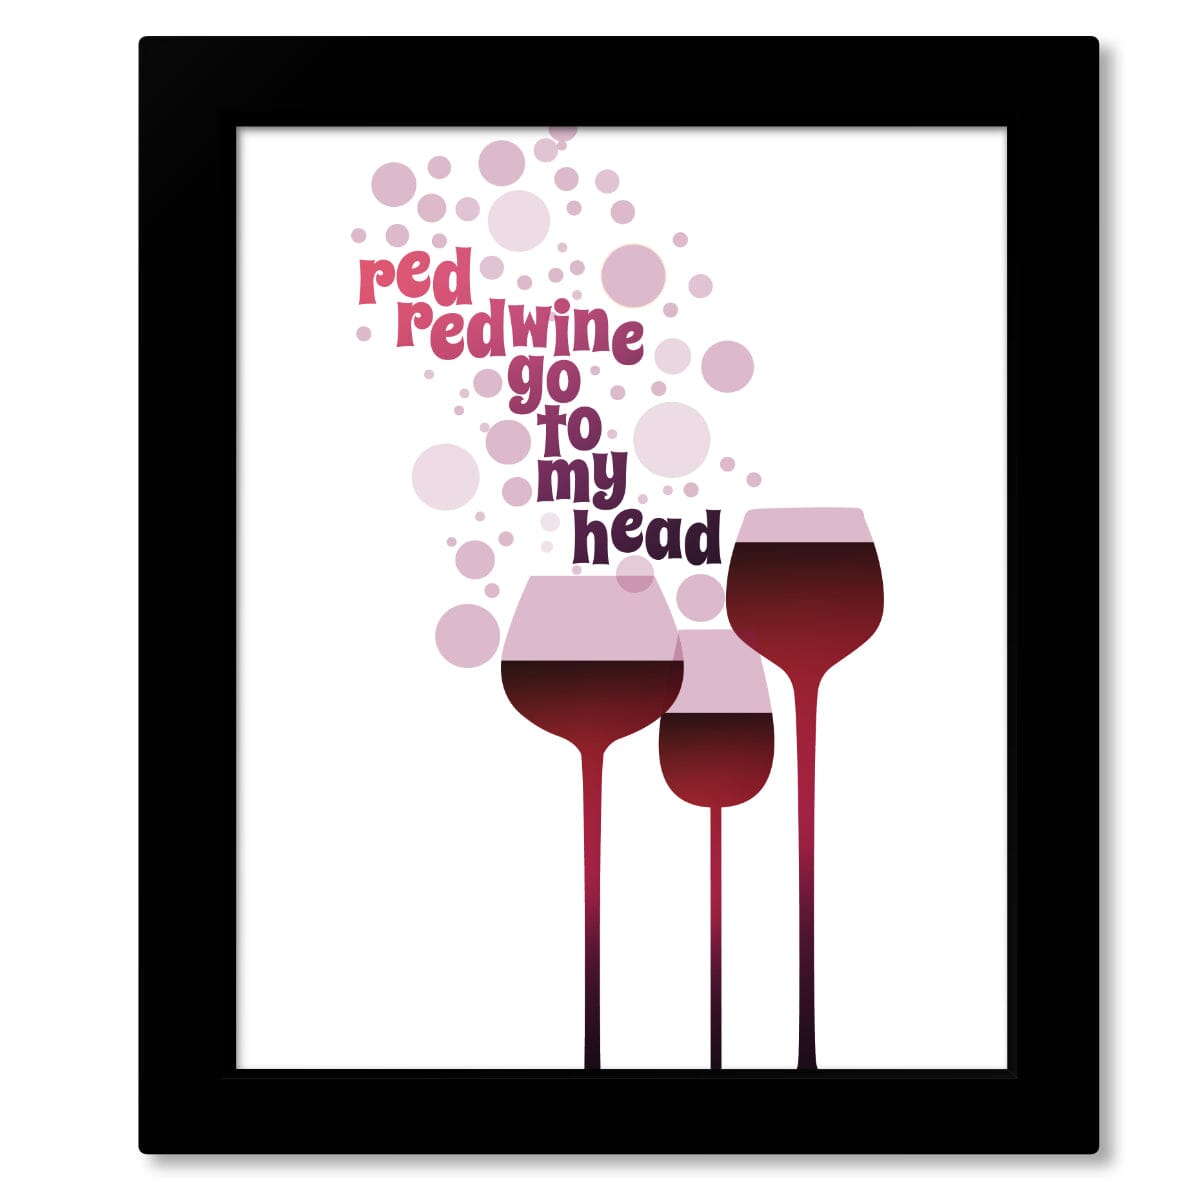 Red Red Wine by Neil Diamond - Music Quote Poster Art Song Lyrics Art Song Lyrics Art 8x10 Framed Print (without mat) 